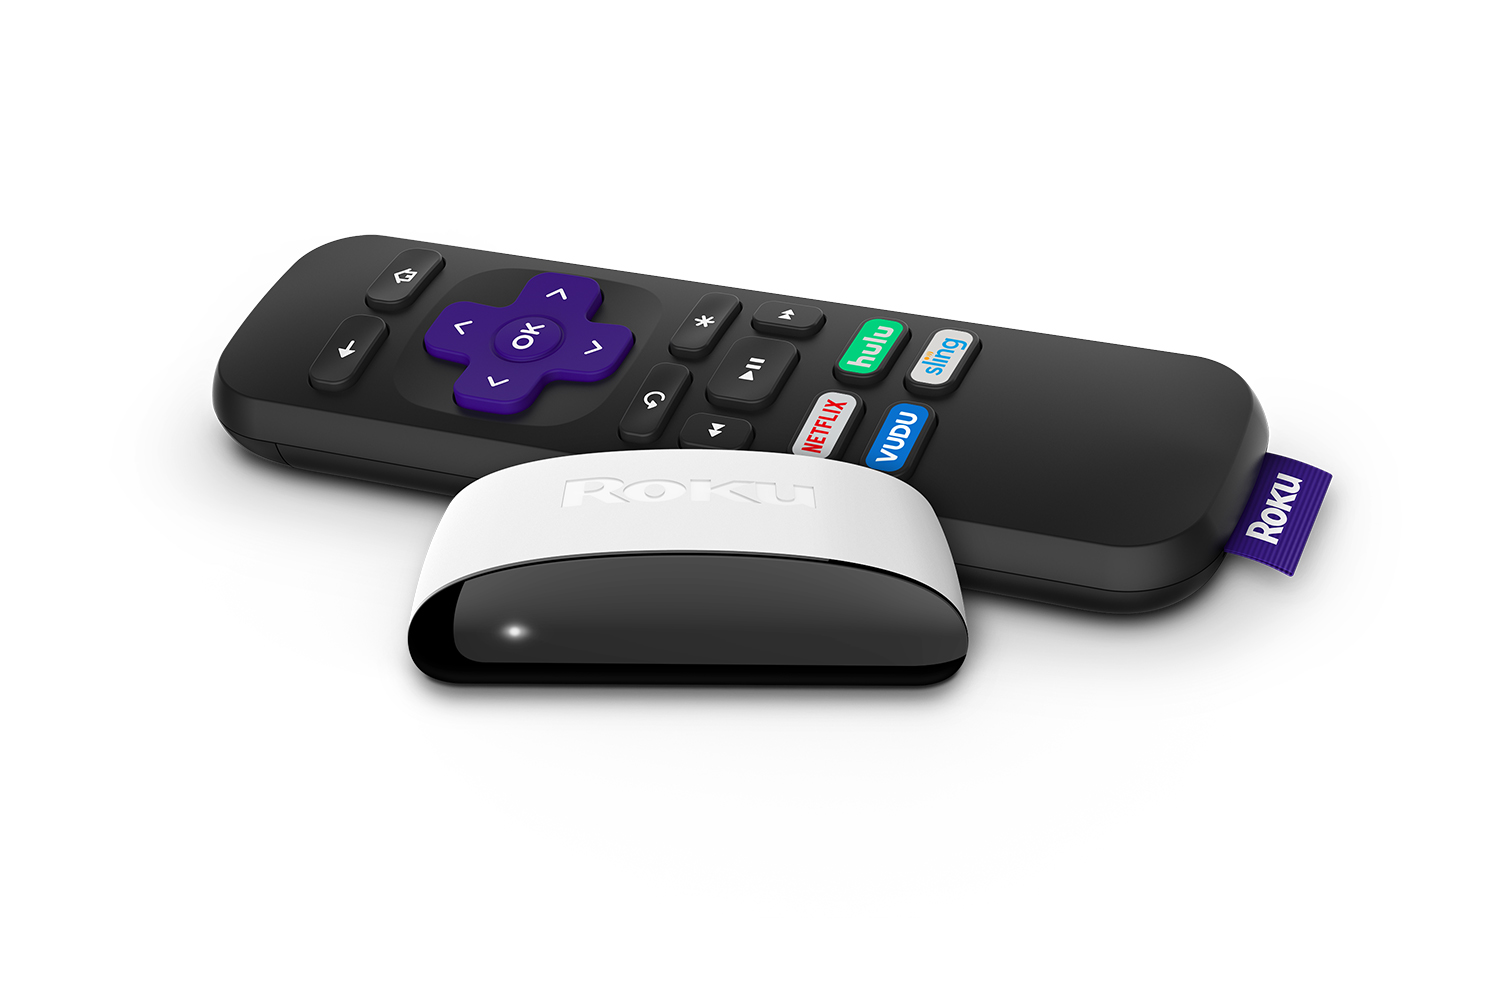 Roku Black Friday deals score a Roku streaming player for as low as